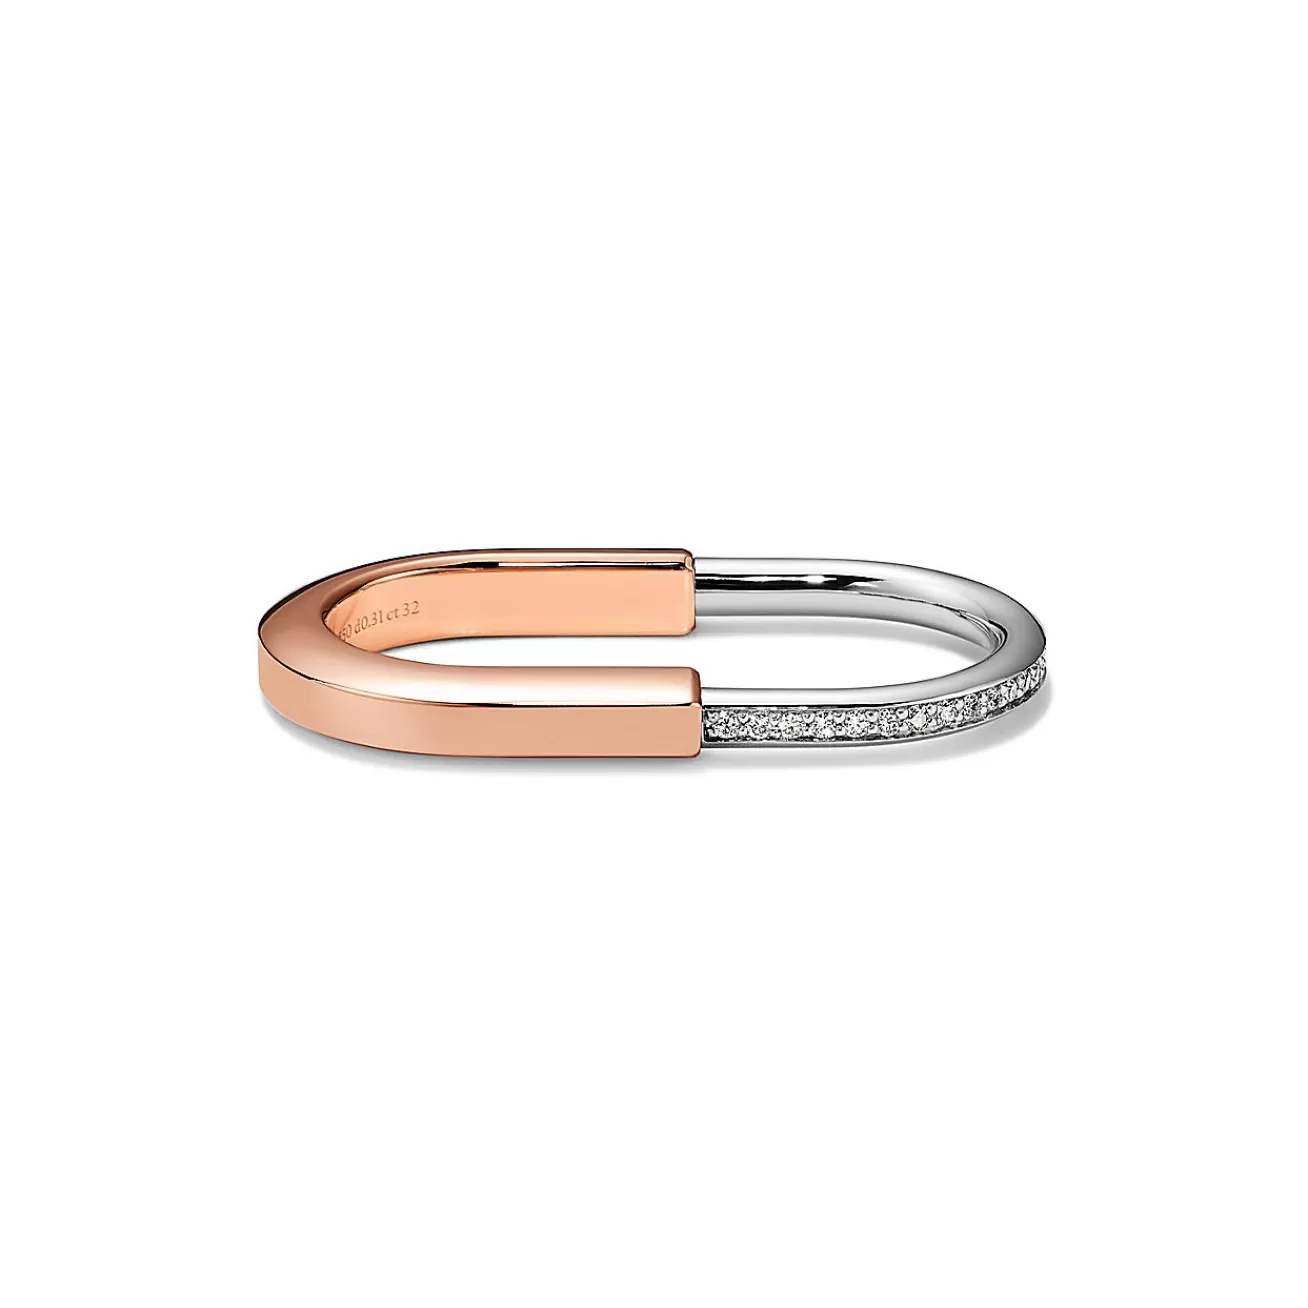 Tiffany & Co. Tiffany Lock Two-finger Ring in Rose and White Gold with Diamonds | ^ Rings | Stacking Rings